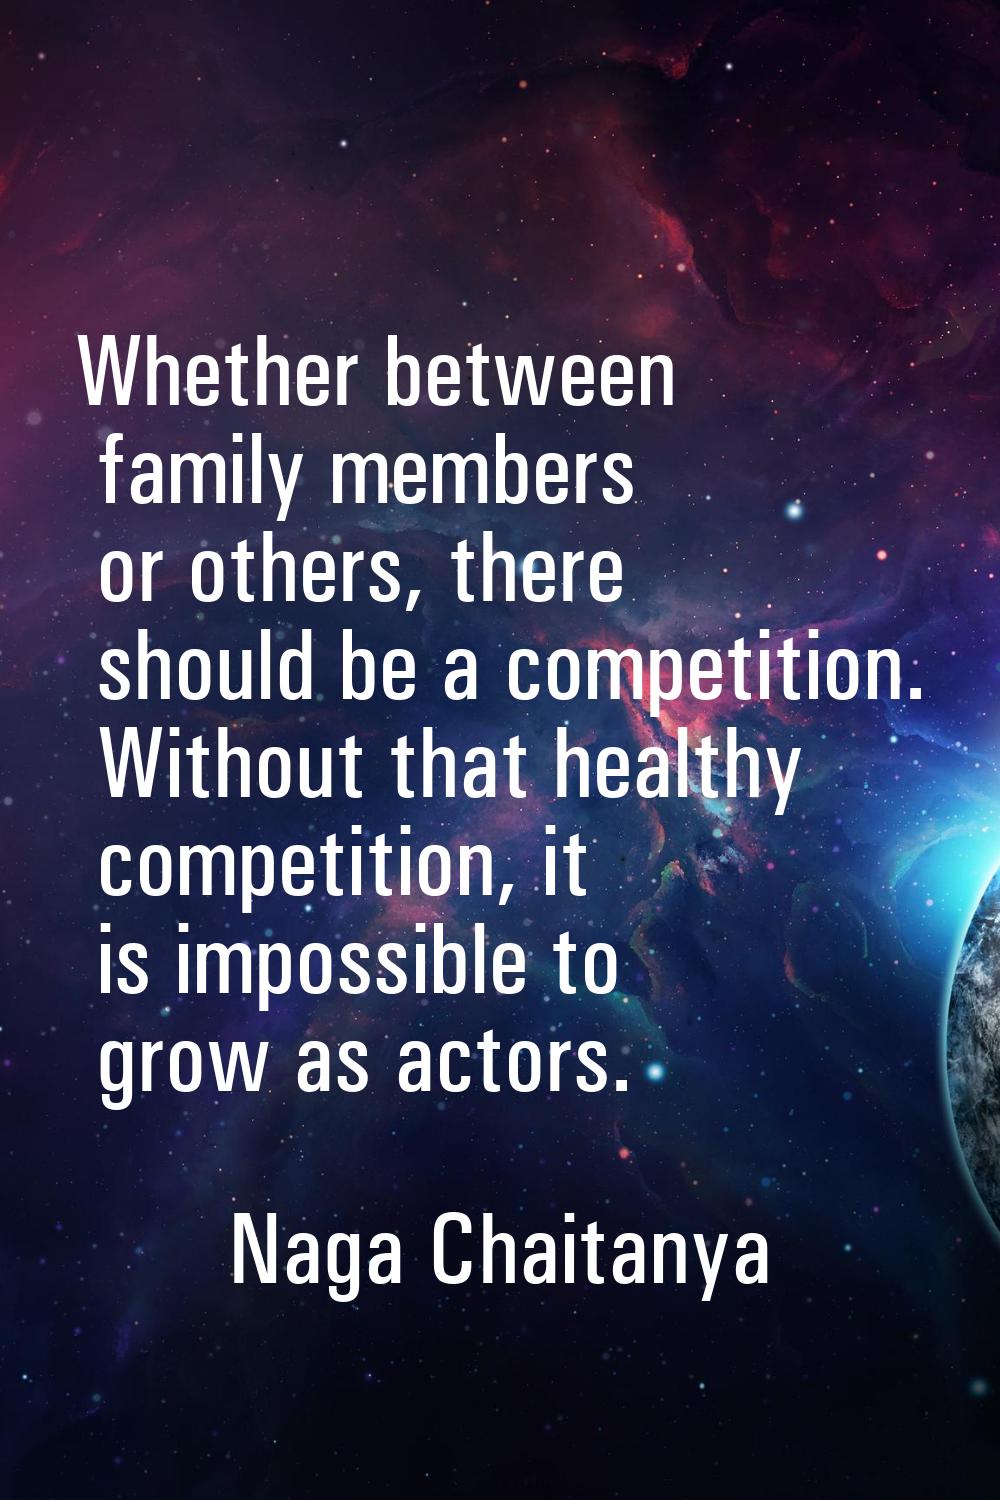 Whether between family members or others, there should be a competition. Without that healthy compe